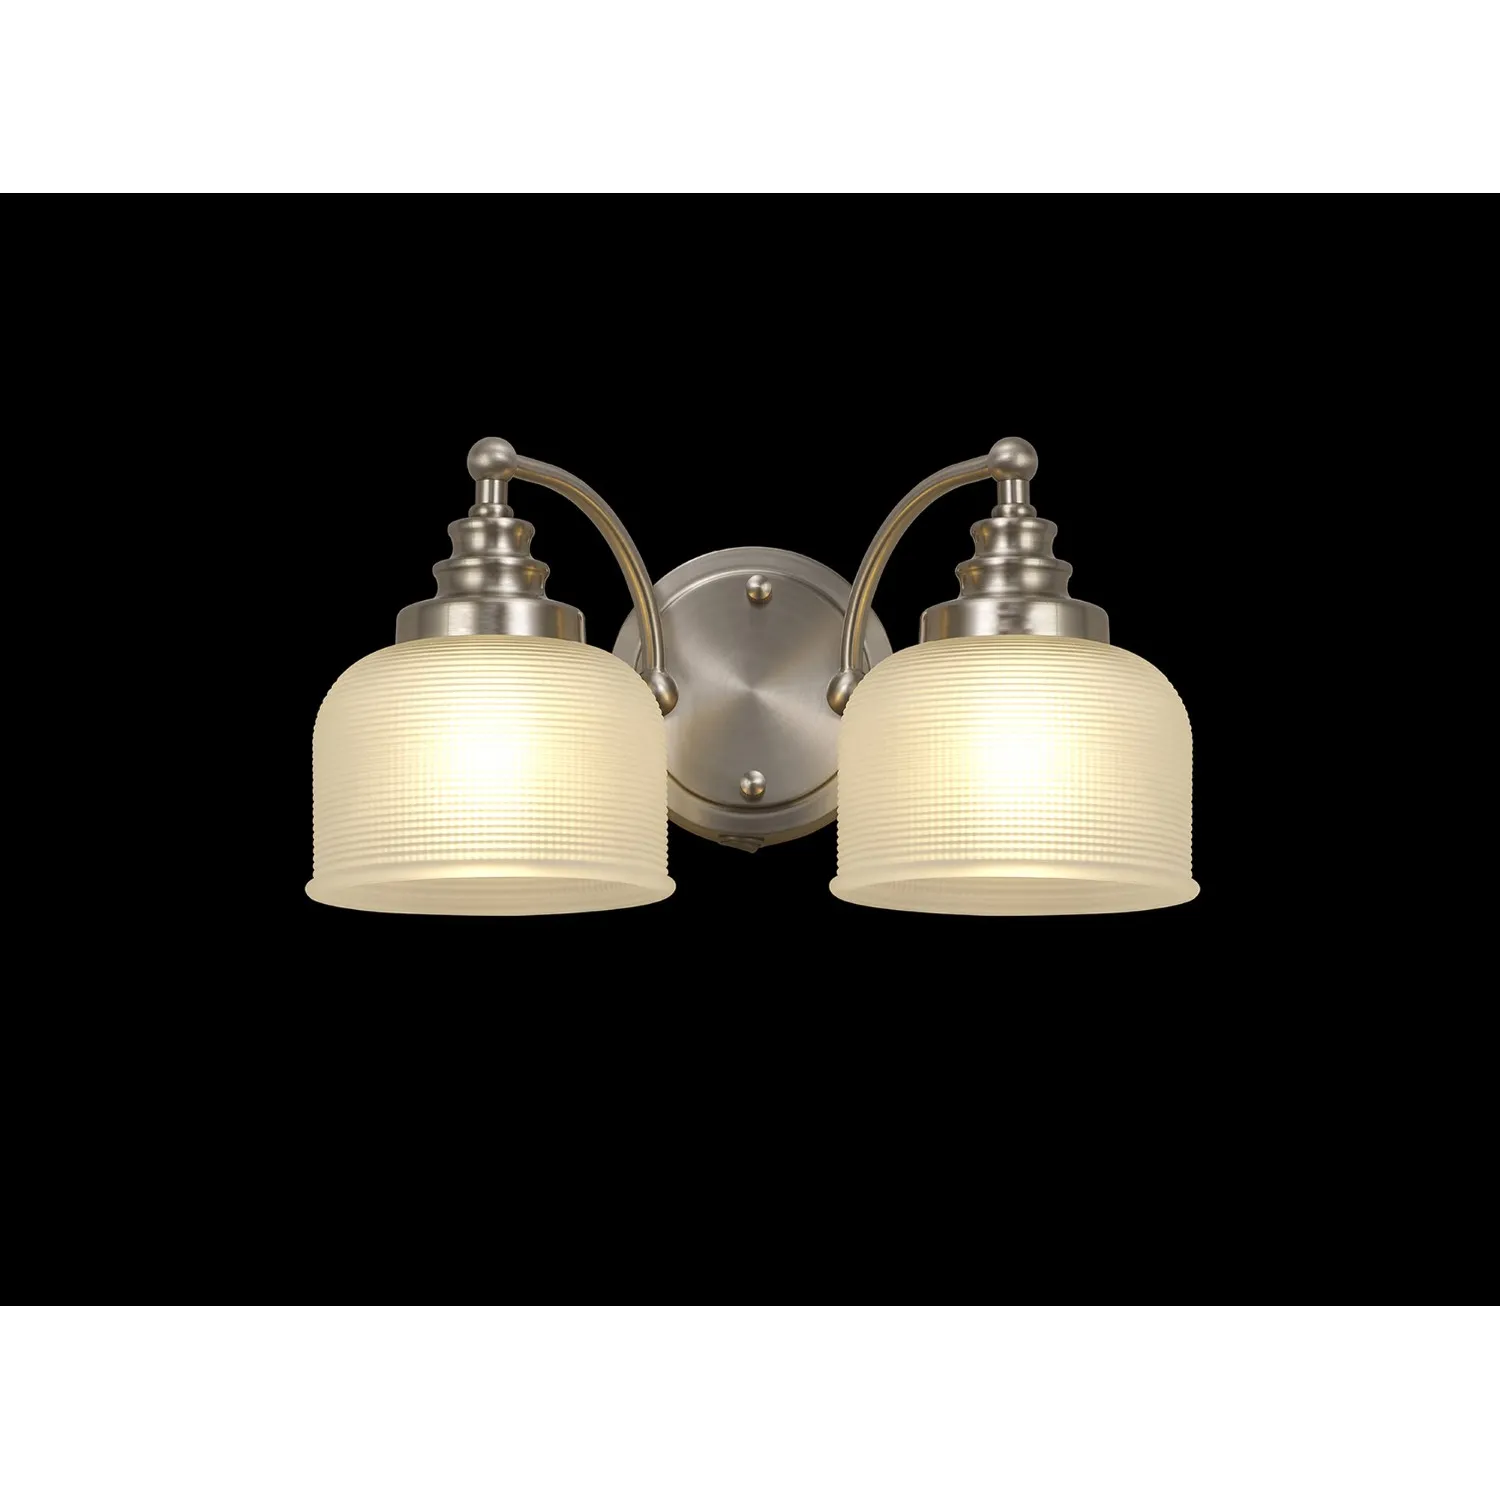 Edenbridge Switched Wall Lamp 2 Light E27 Satin Nickel Frosted Glass